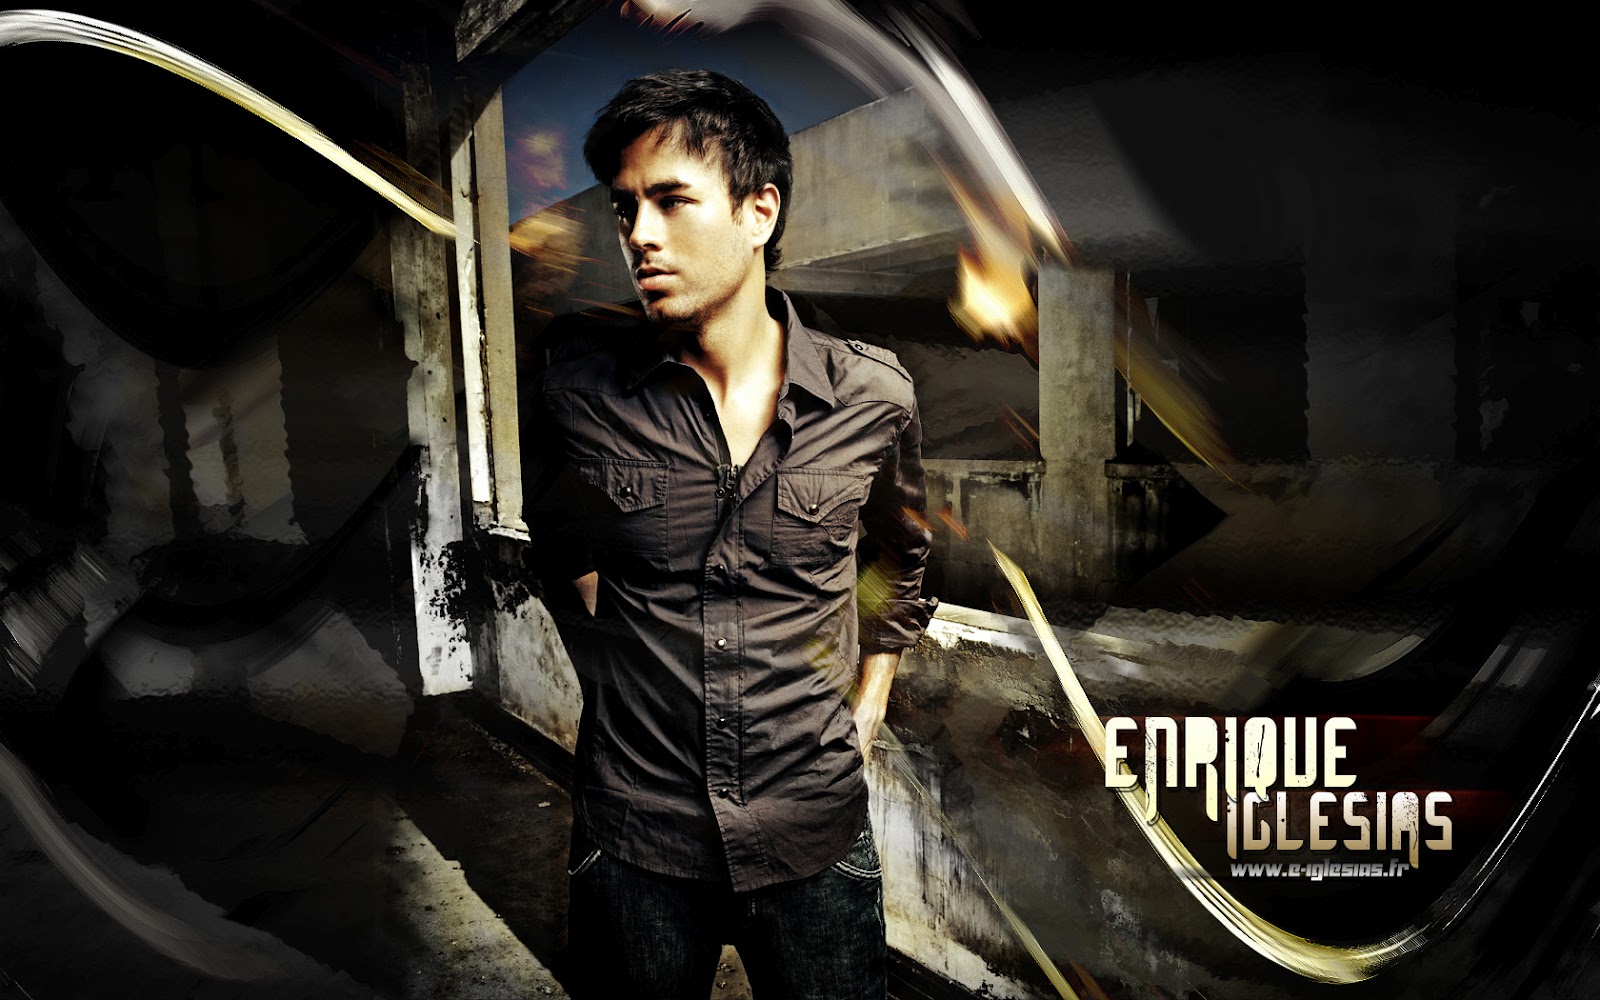 Free Wallpapers Enrique Iglesias Latest Hd Wallpapers